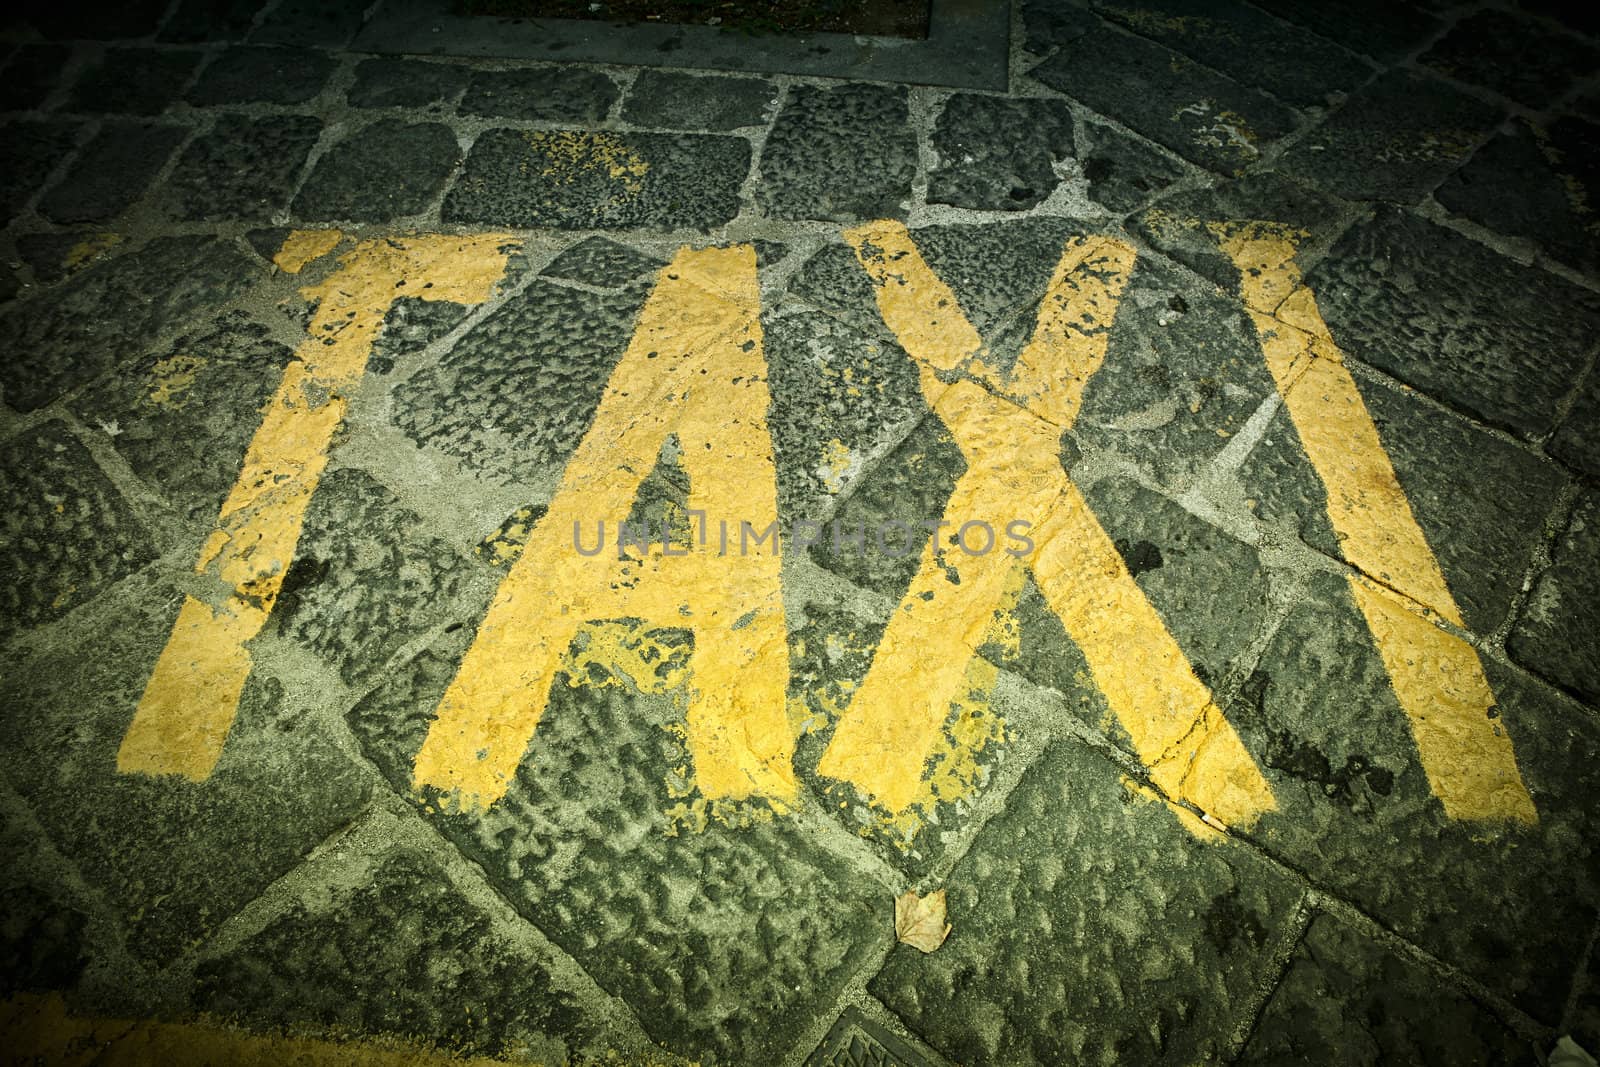 Taxi -  text painted in the street.